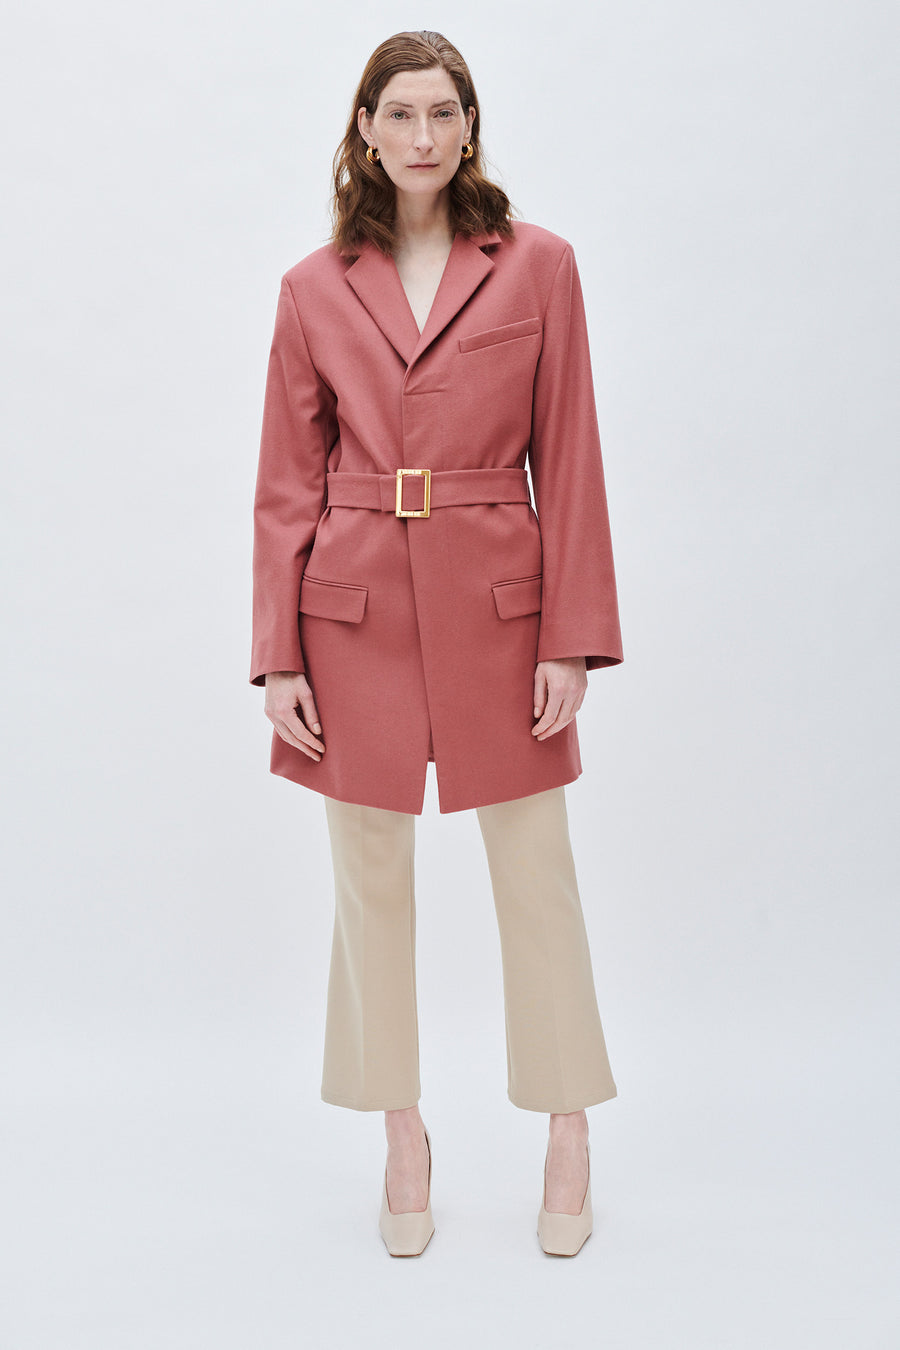 AQVAROSSA Asilah loden jacket in coral colour front view